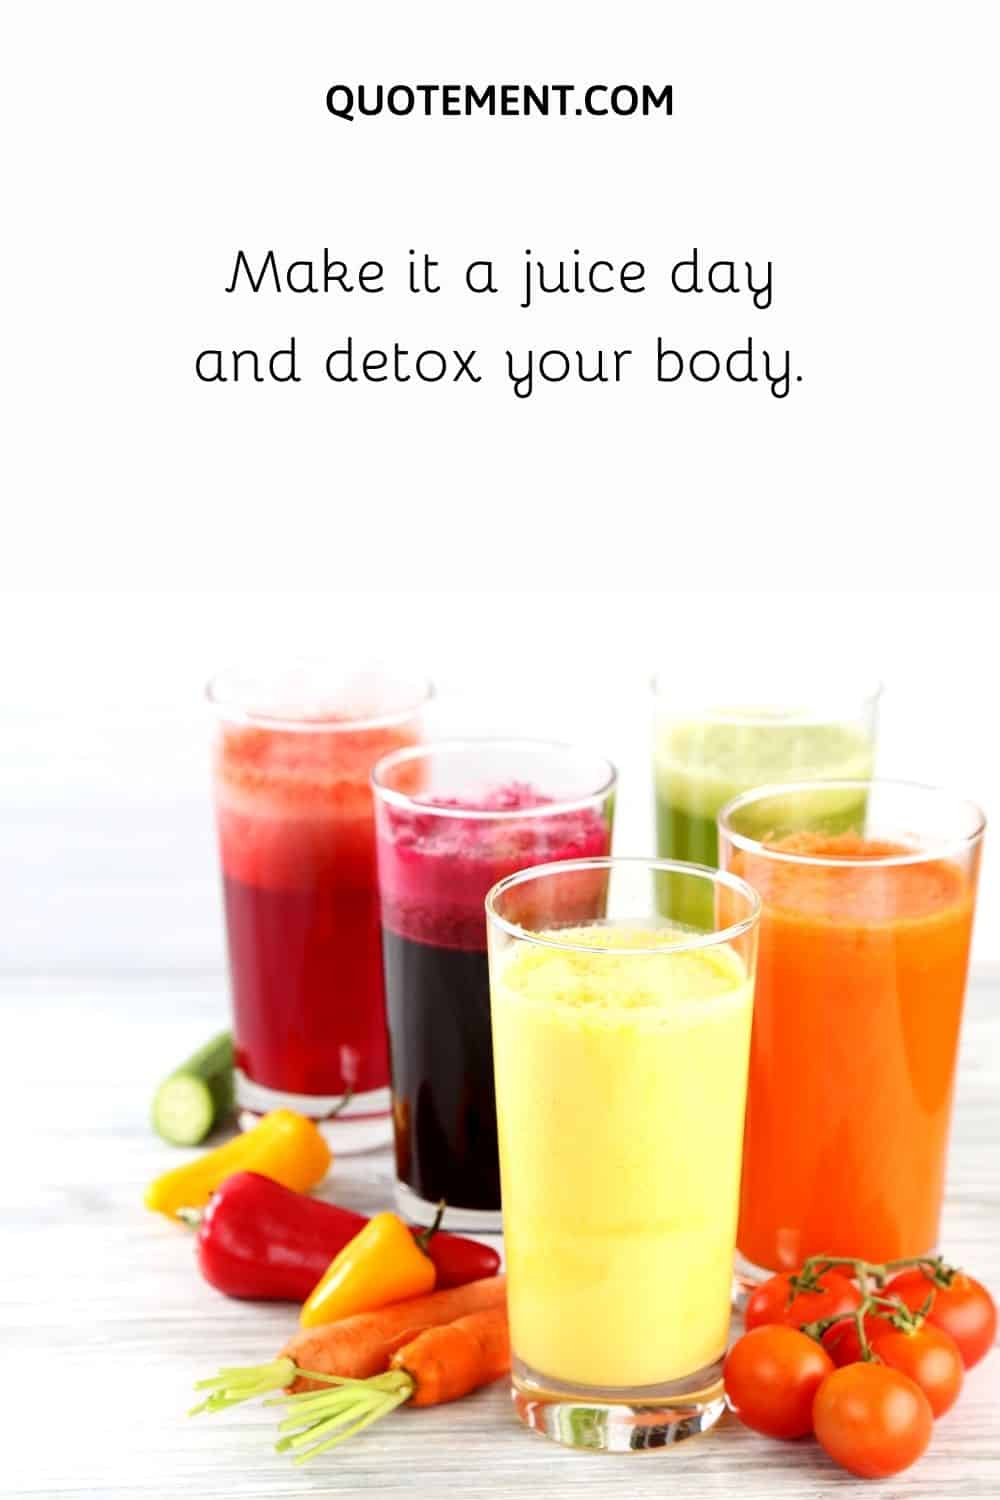 Make it a juice day and detox your body